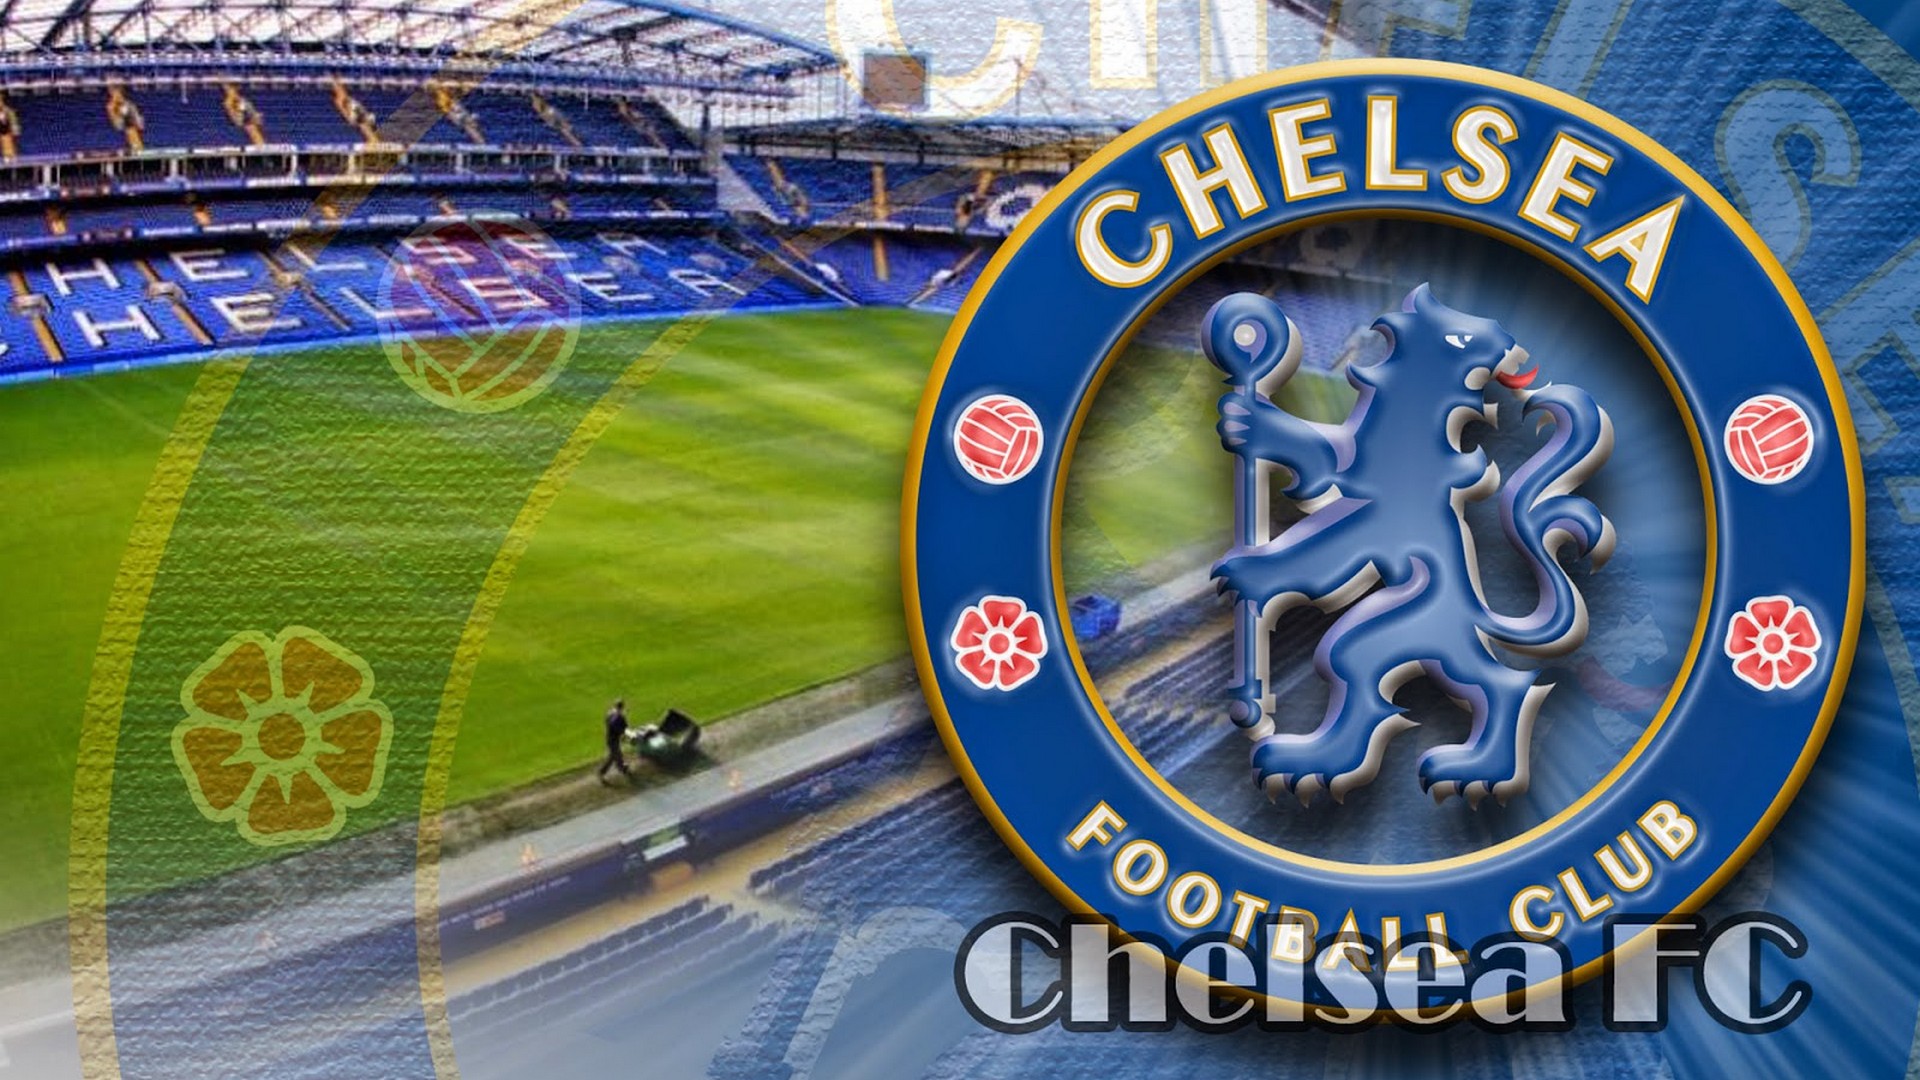 Wallpapers HD Chelsea FC With Resolution 1920X1080 pixel. You can make this wallpaper for your Mac or Windows Desktop Background, iPhone, Android or Tablet and another Smartphone device for free